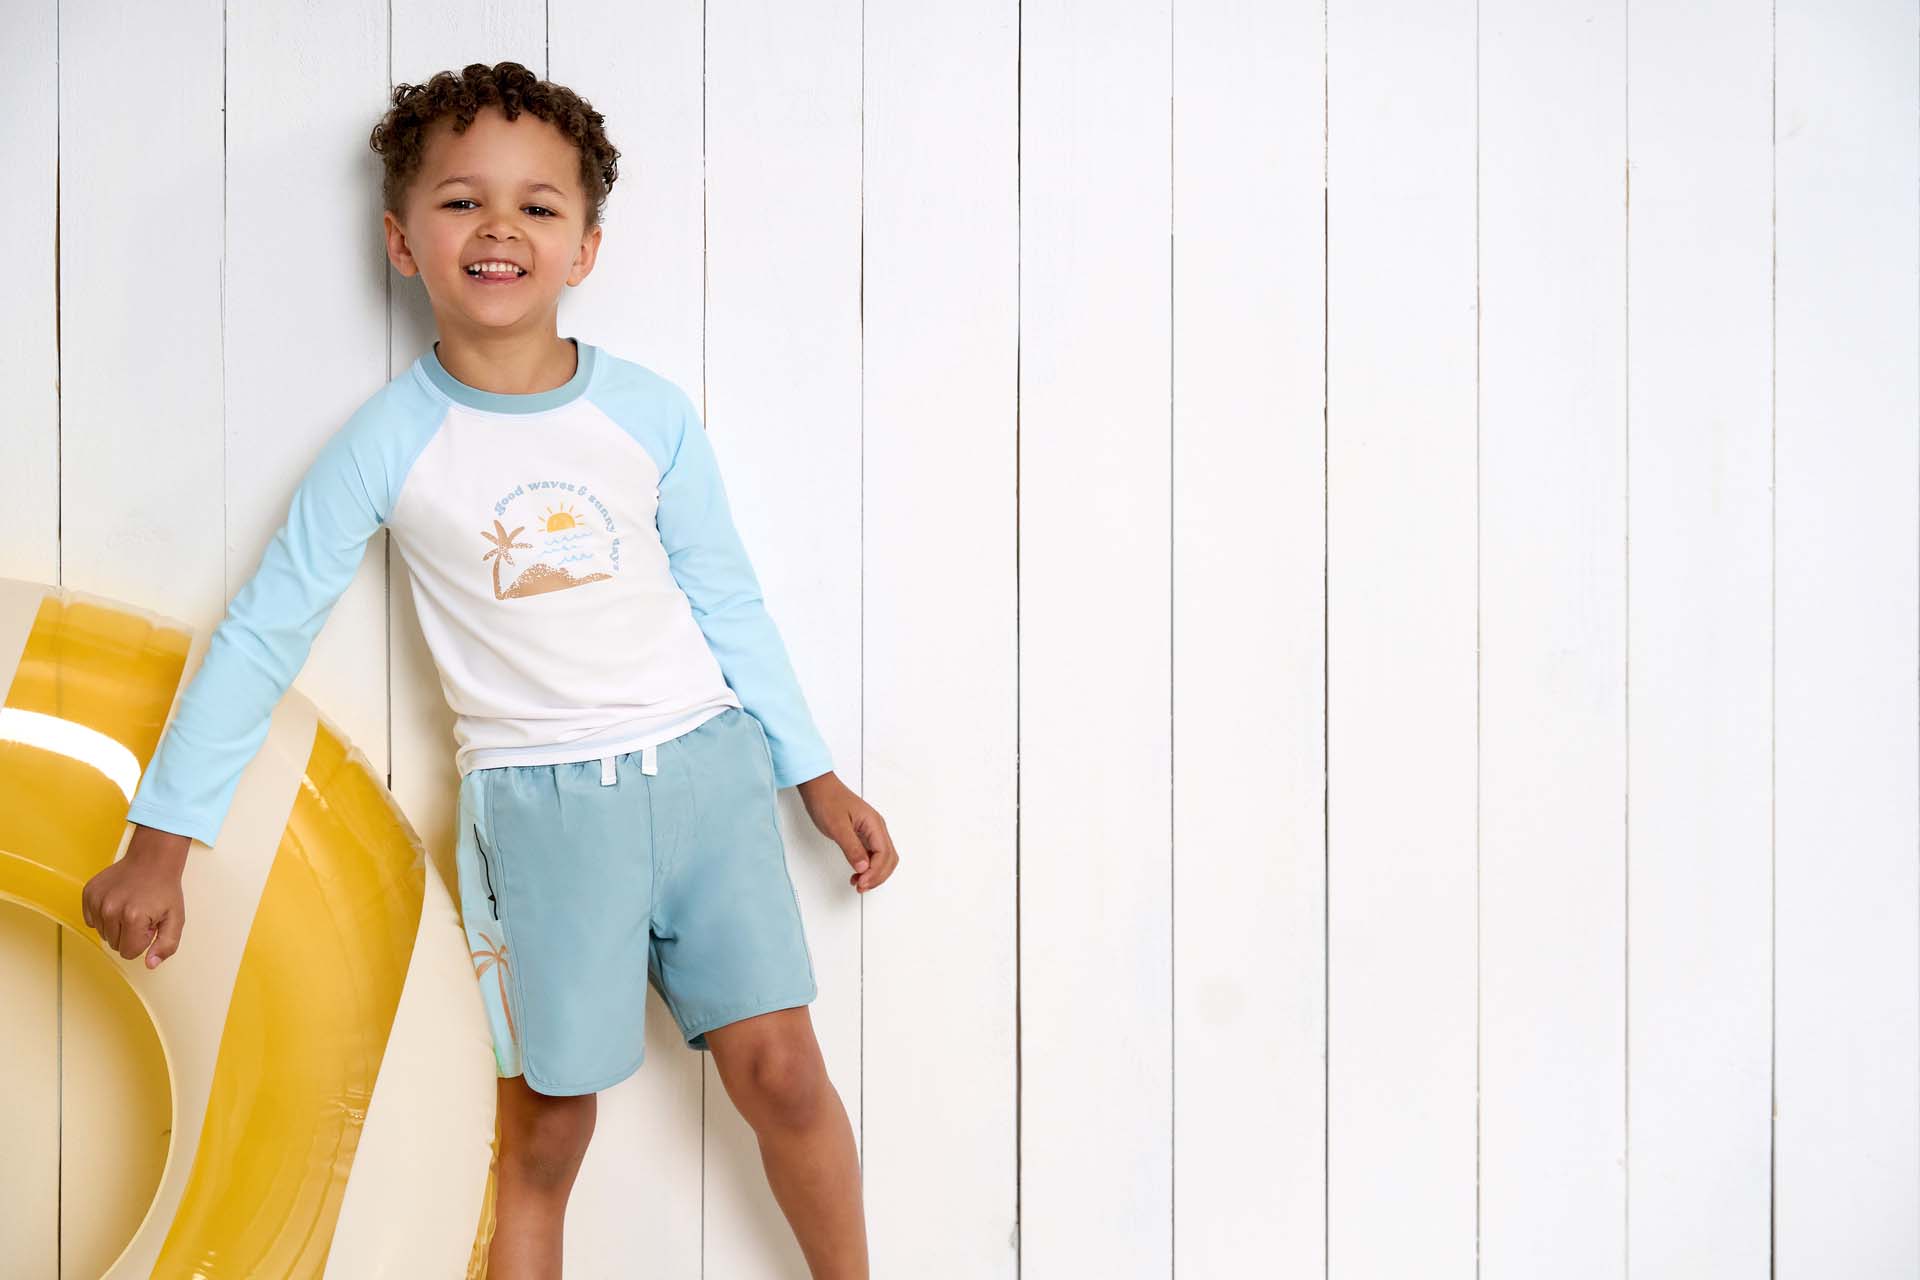 A toddler boy in a blue swim set smiling and posing with a yellow swim ring, standing against a white wooden background.